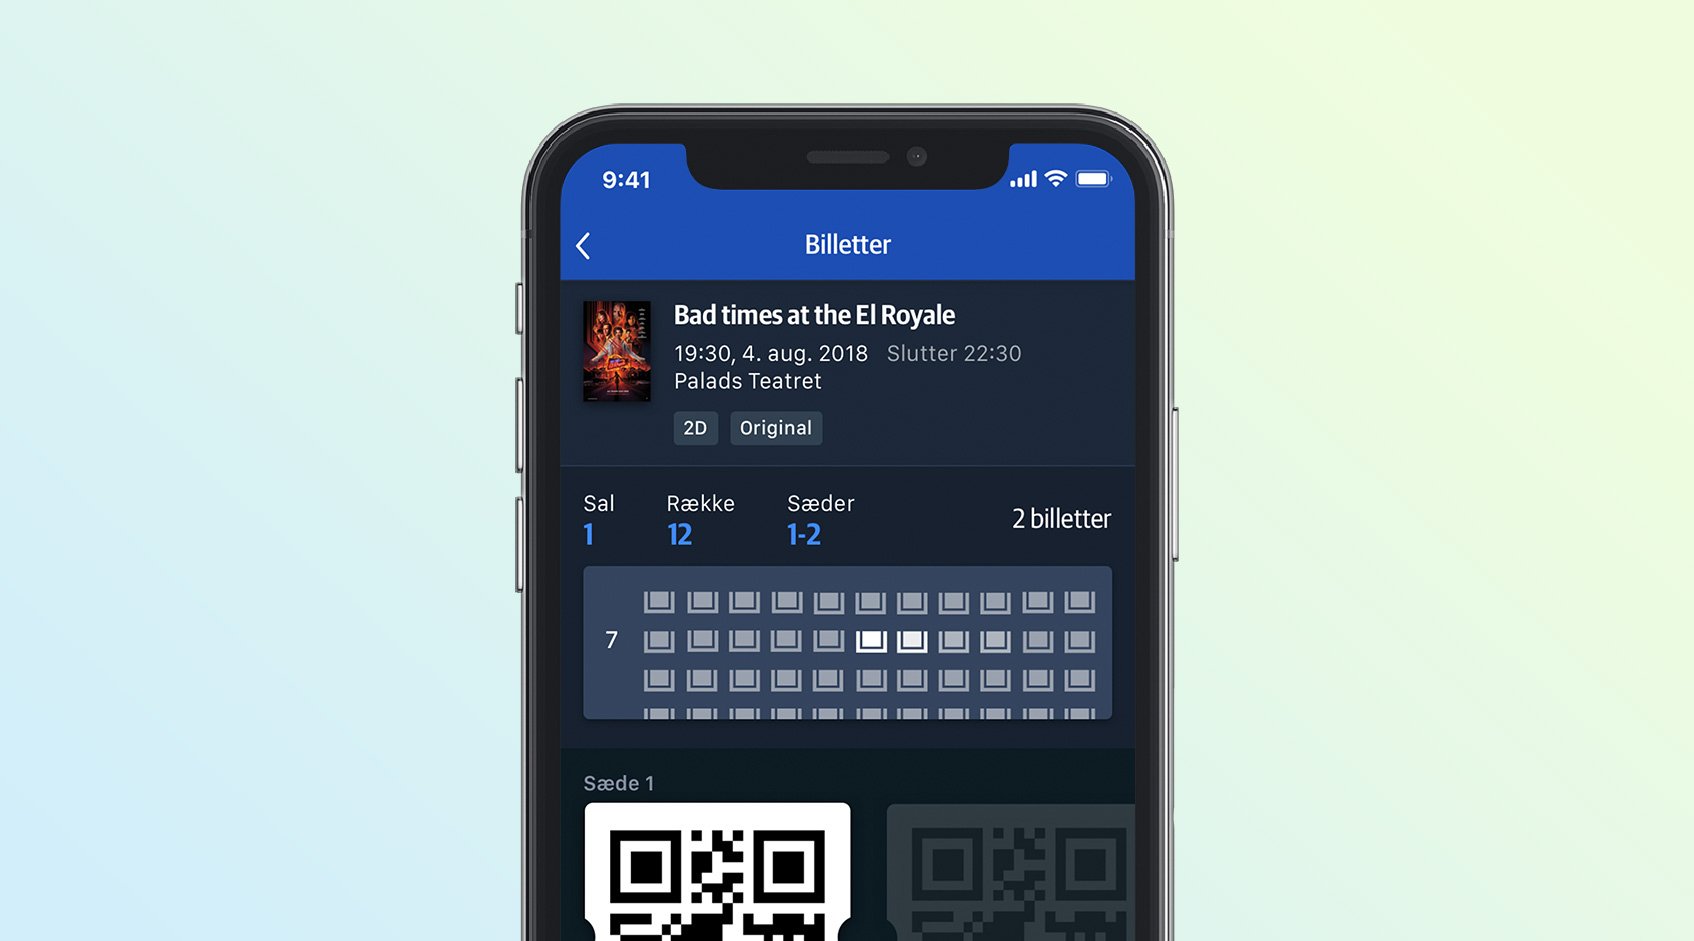 Ticket details and QR code